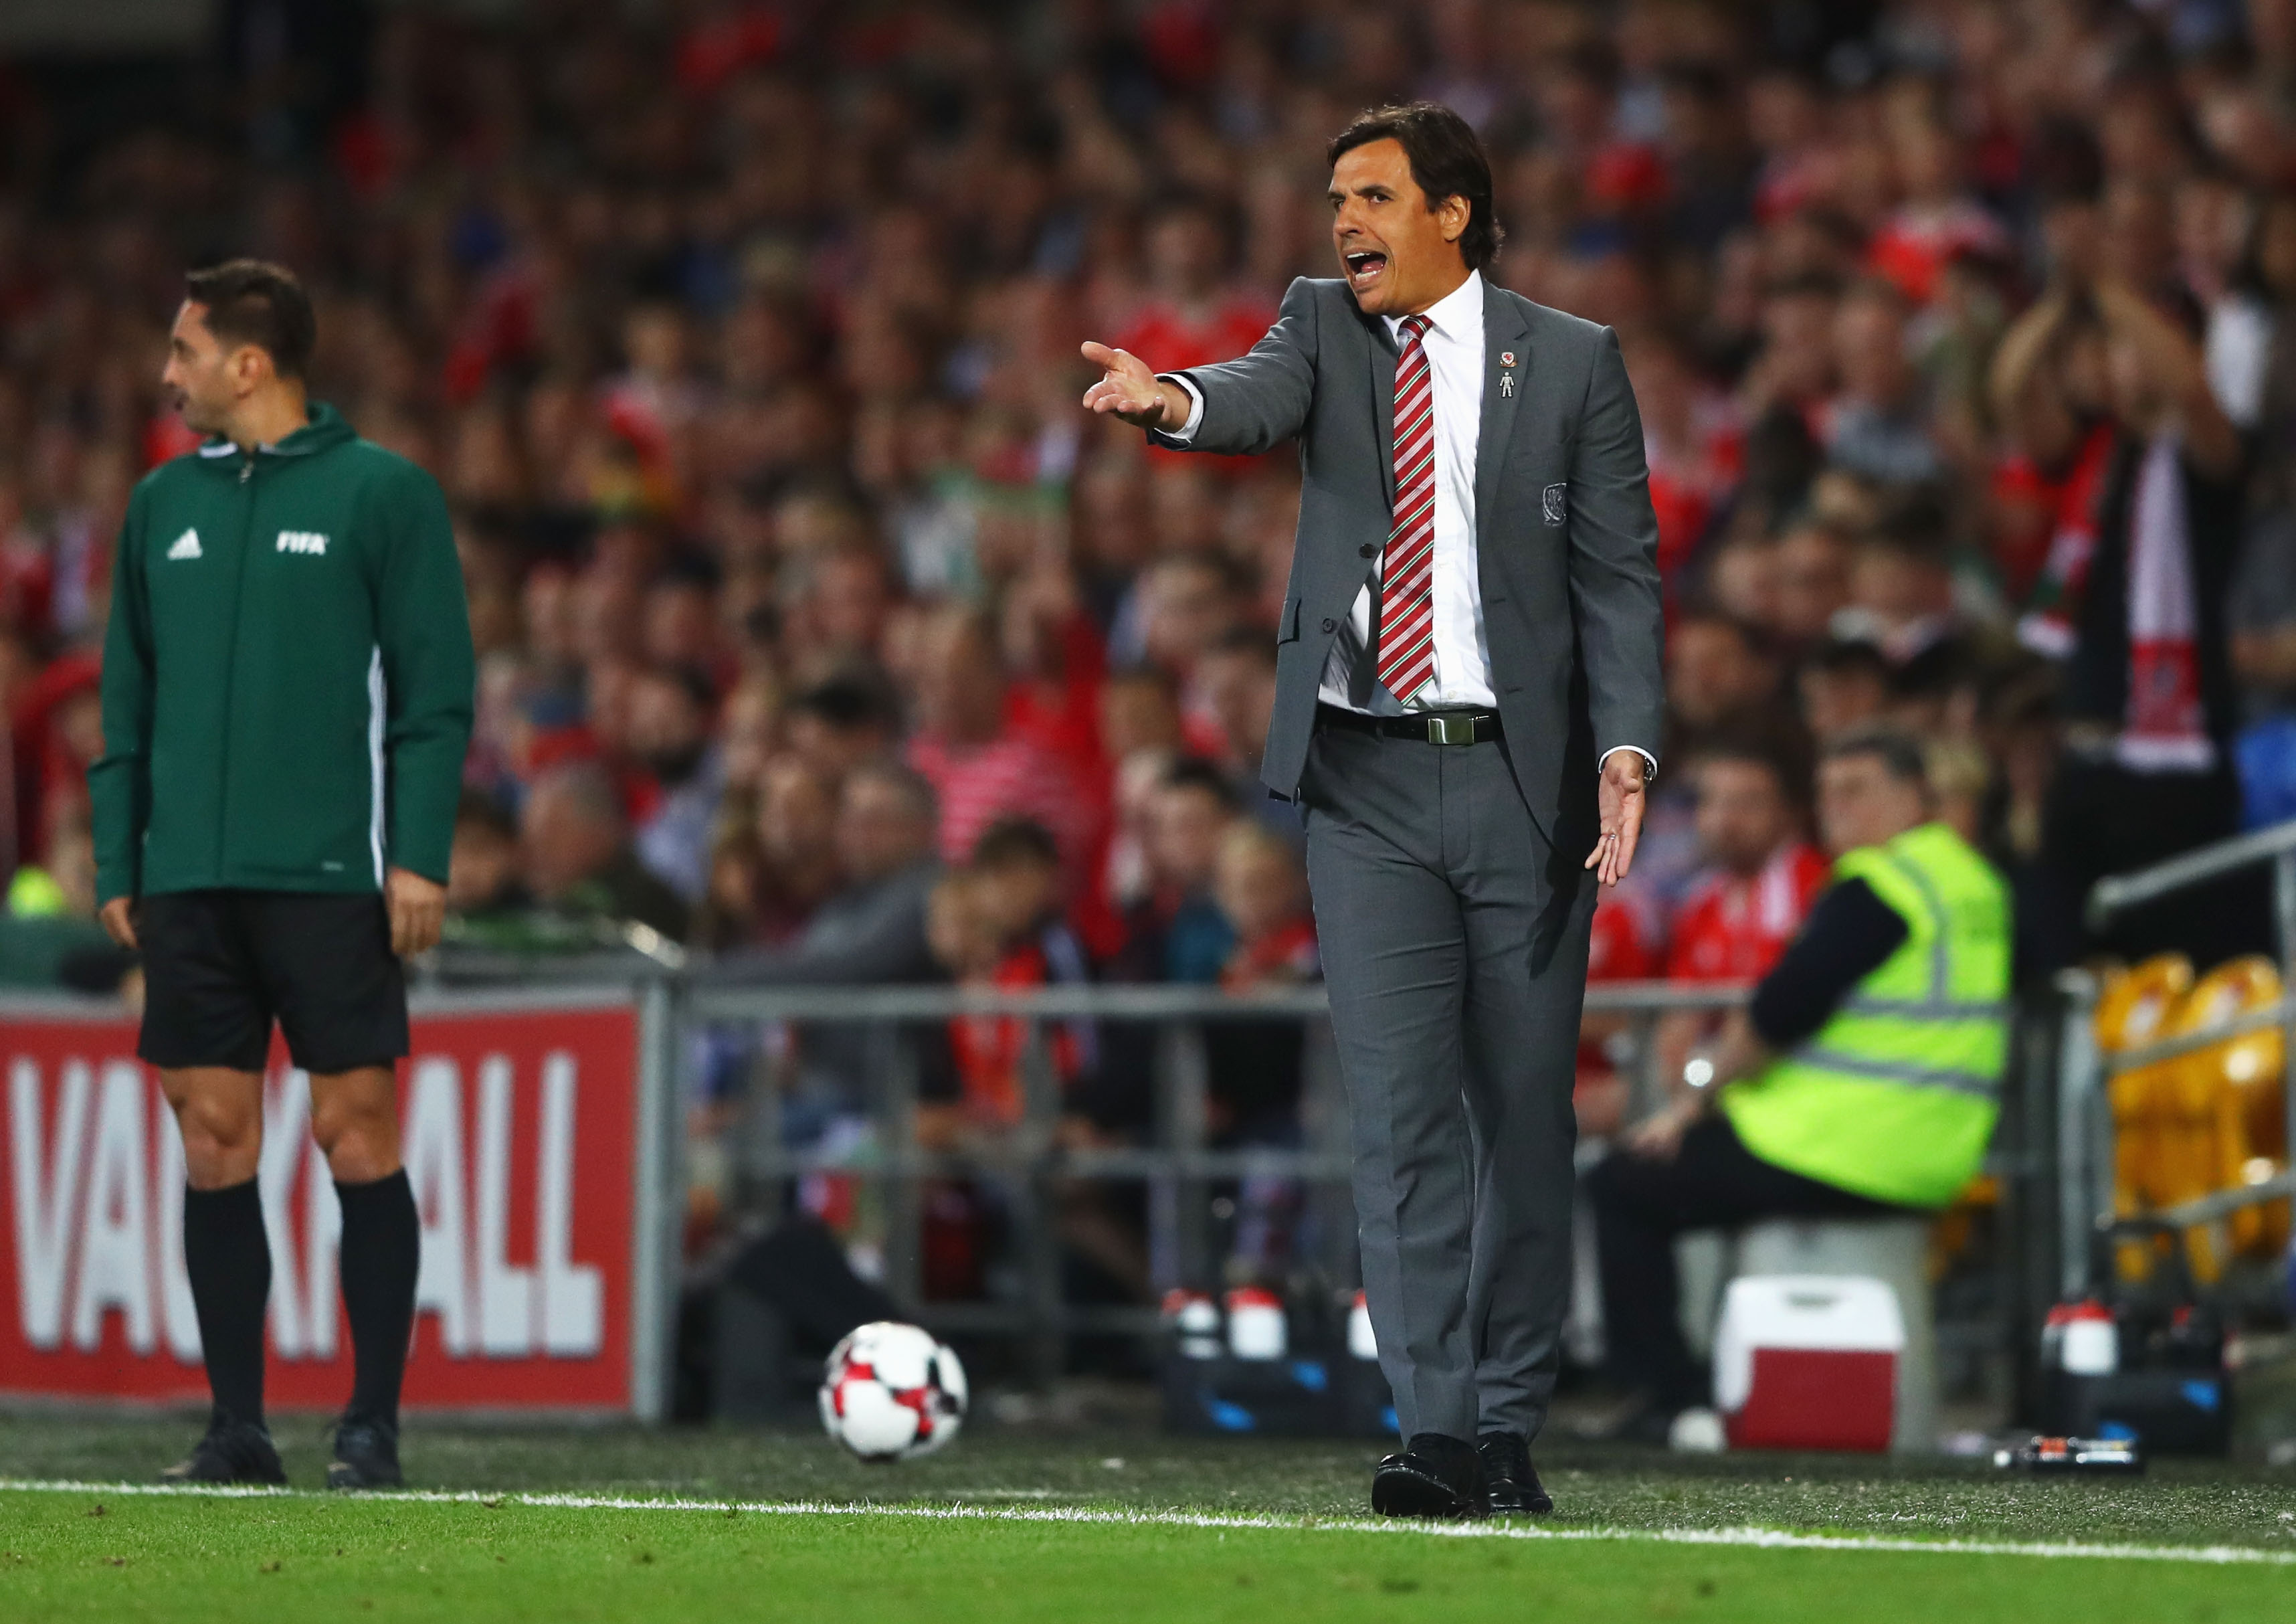 CARDIFF, WALES - SEPTEMBER 02:  Chris Coleman manager of Wales reacts on the touchline during the FIFA 2018 World Cup Qualifier between Wales and Austria at Cardiff City Stadium on September 2, 2017 in Cardiff, Wales.  (Photo by Michael Steele/Getty Images)